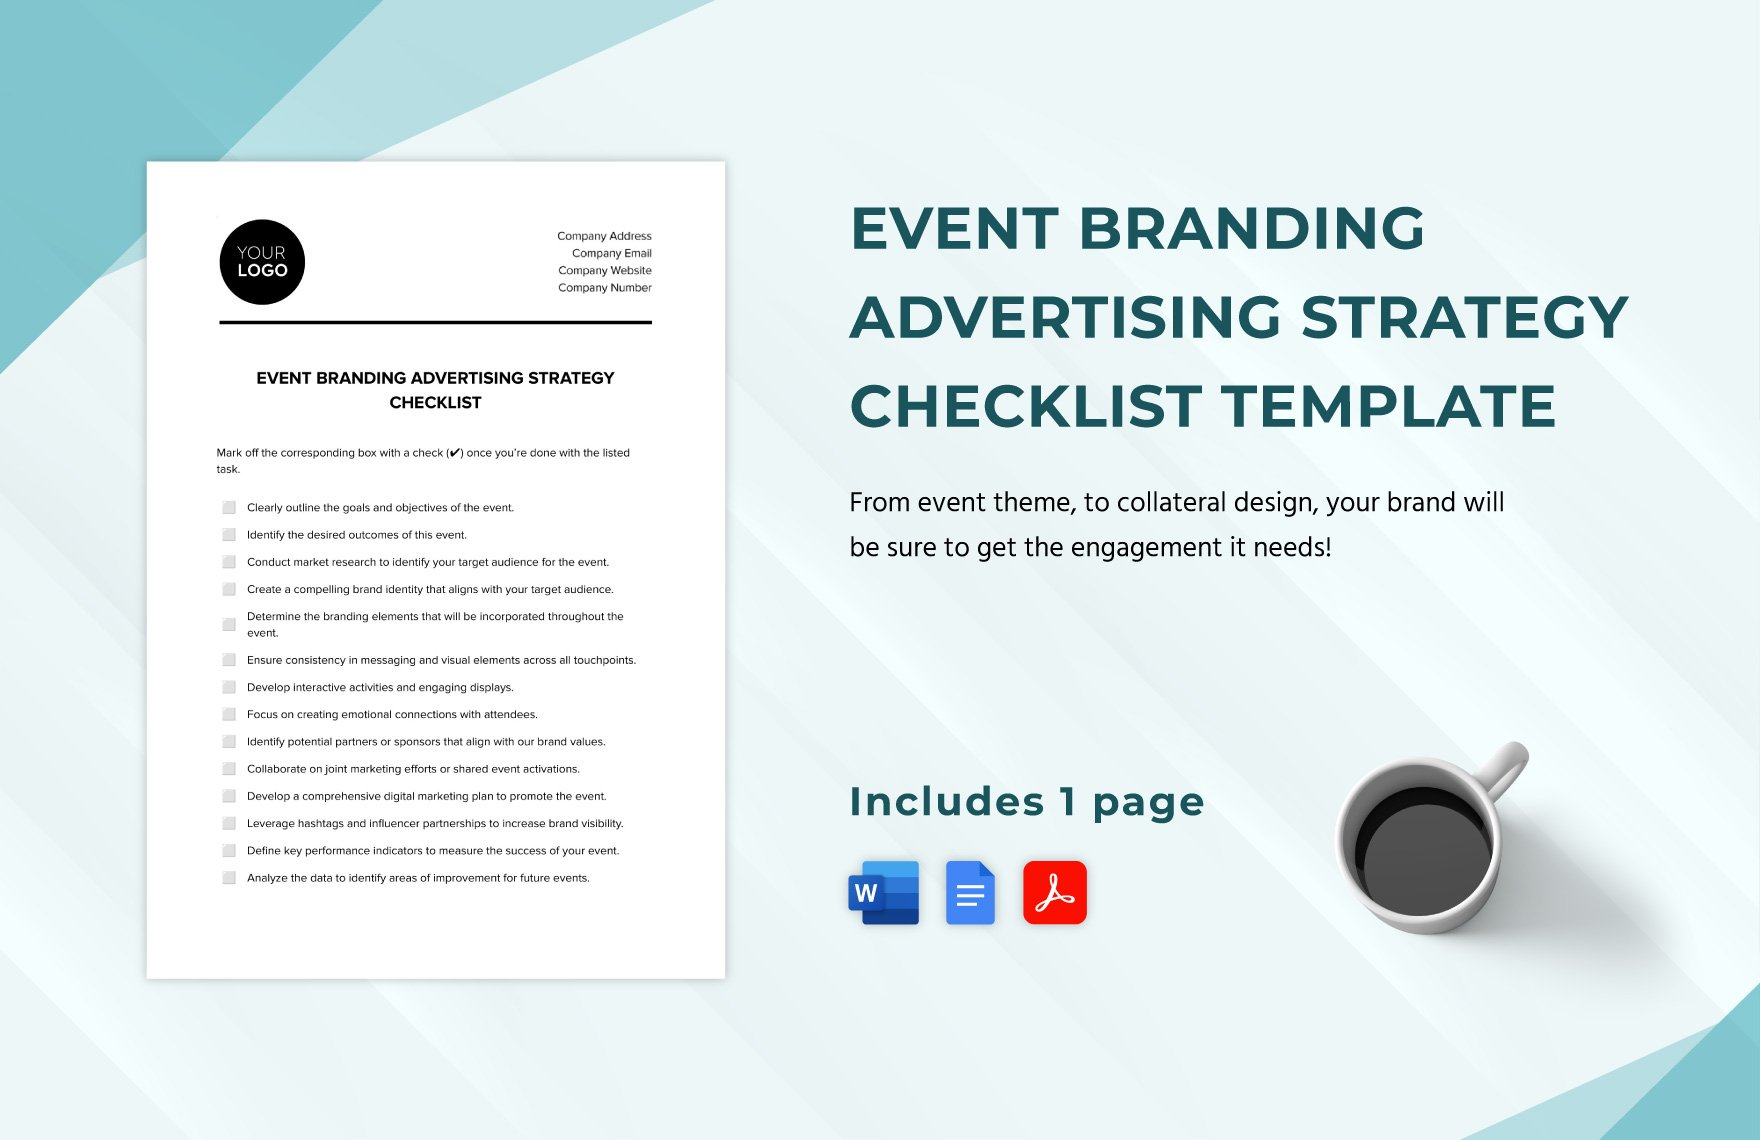 Event Branding Advertising Strategy Checklist Template in Word, Google Docs, PDF